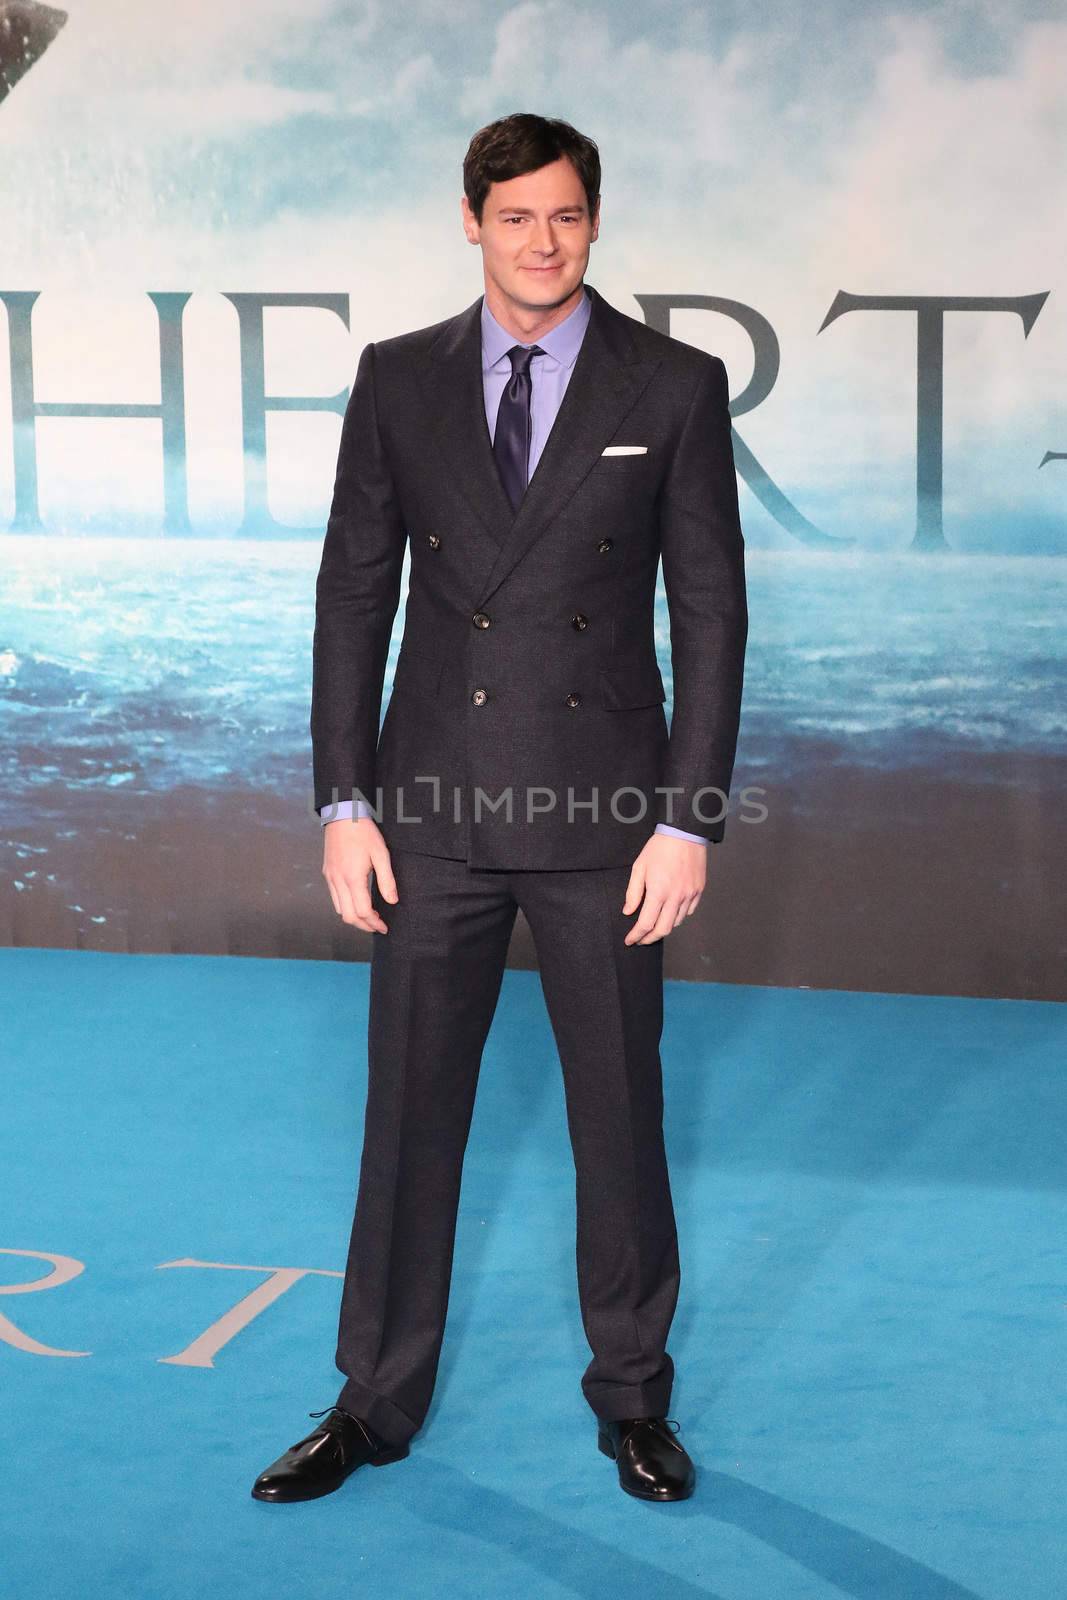 UNITED KINGDOM, London: American actor Ben Walker poses for photographers during the premier of In the Heart of the Sea, a Ron Howard movie, in London on December 2nd, 2015.